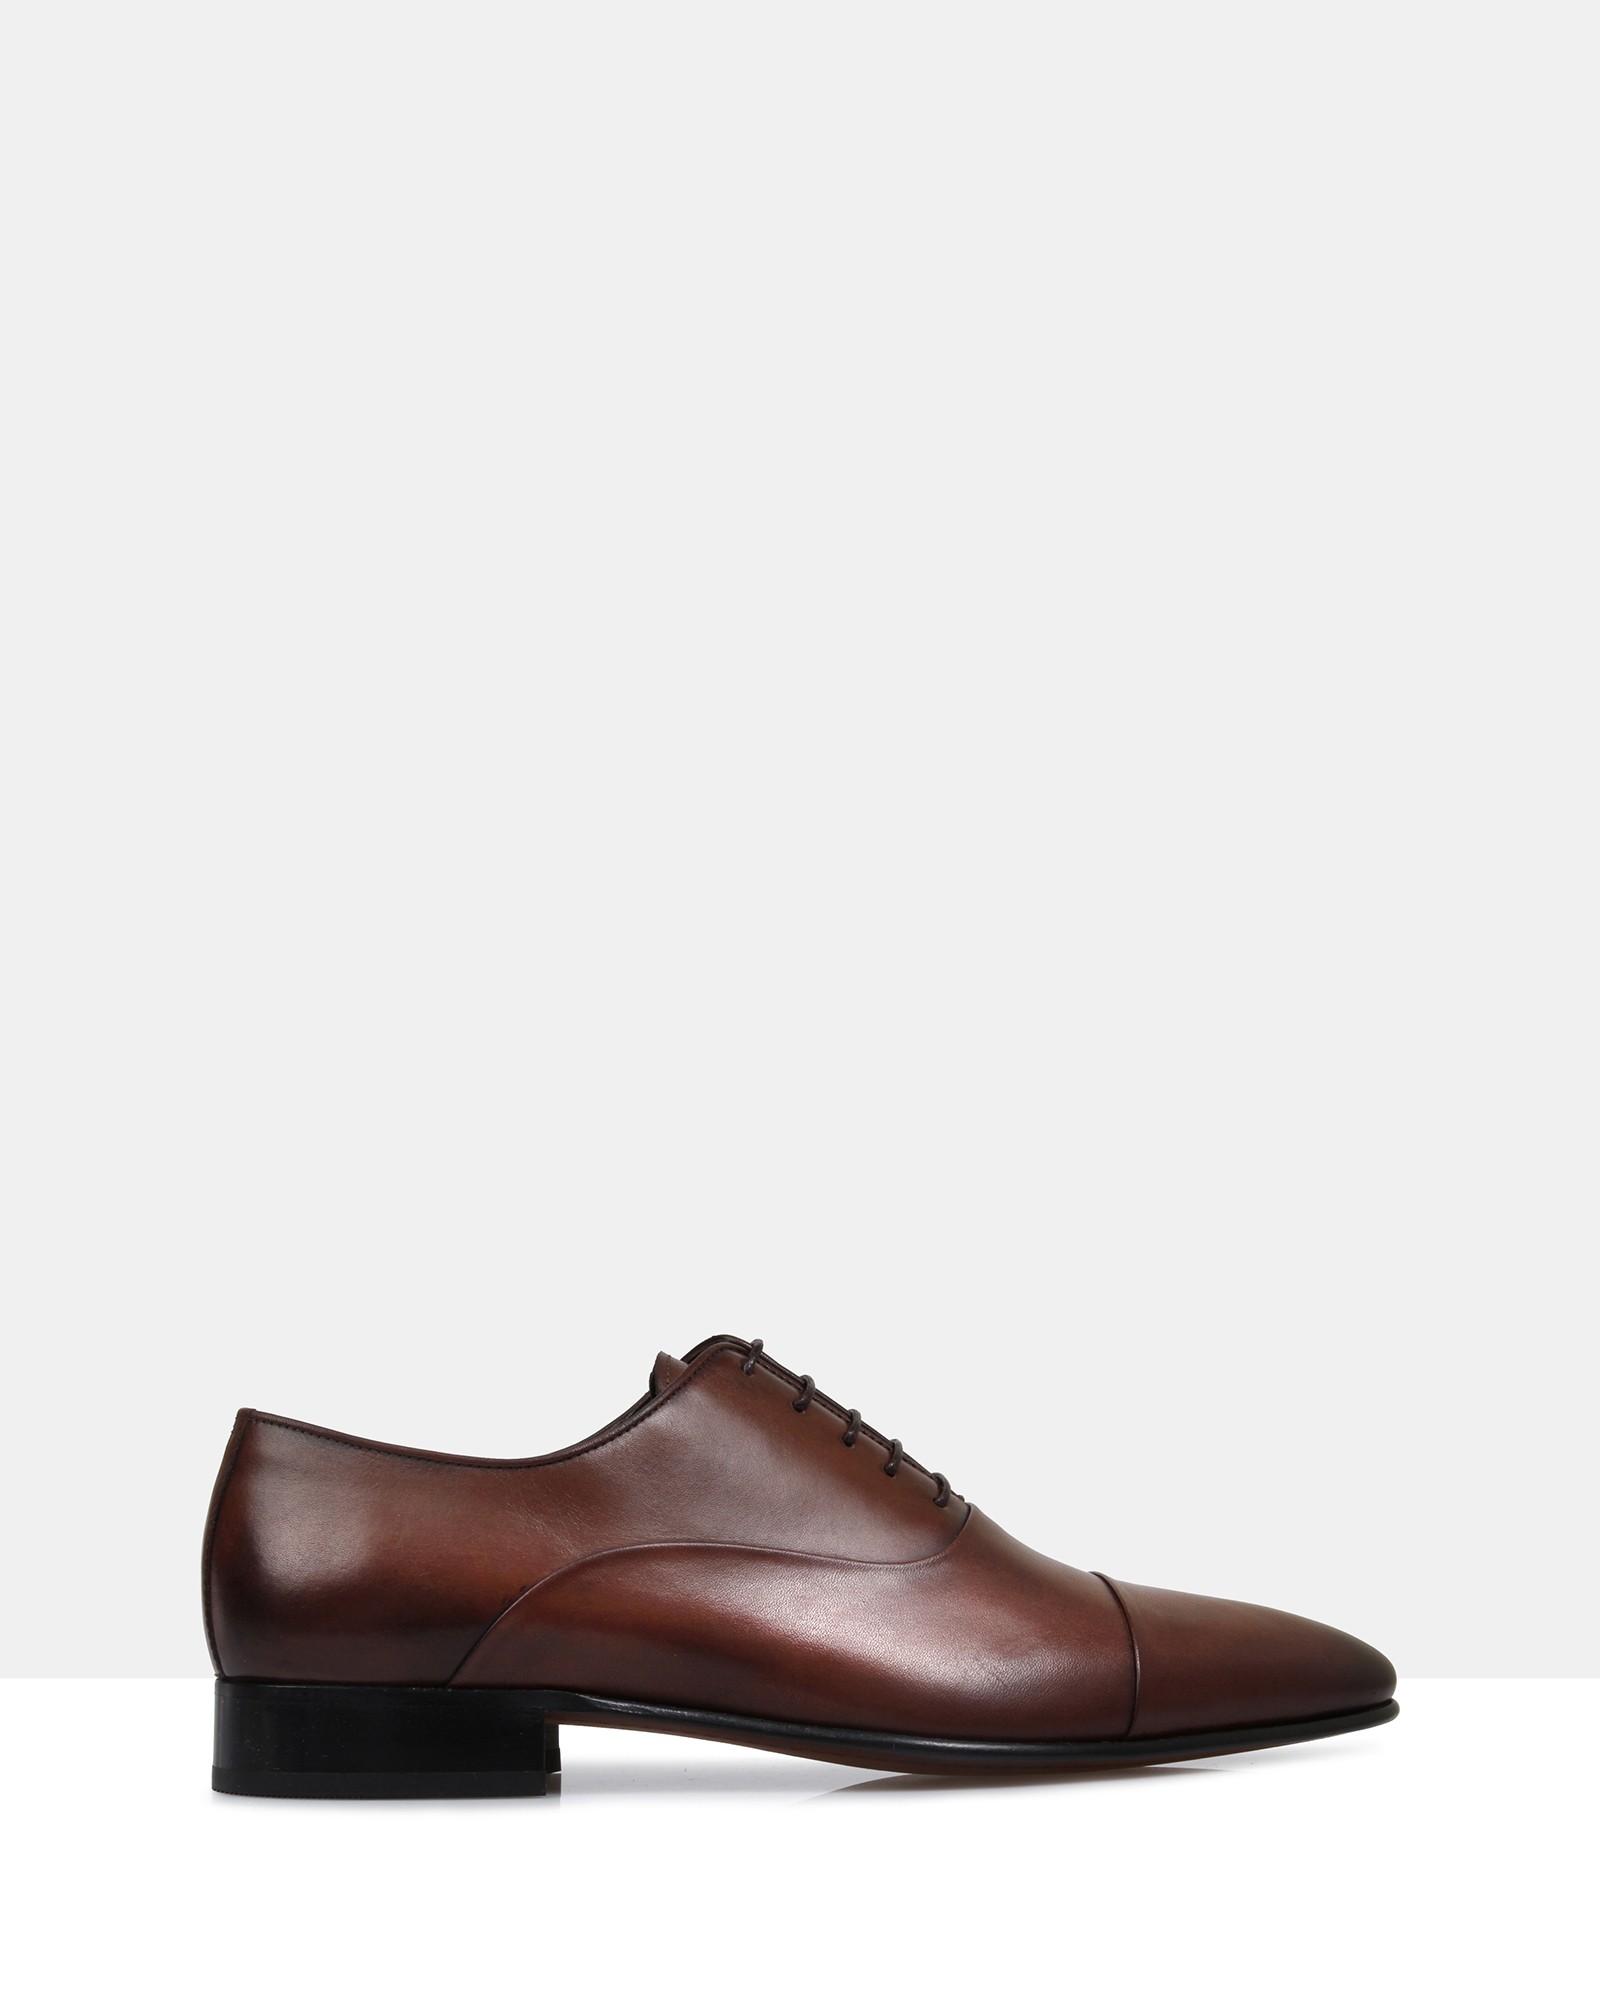 Austin Leather Oxford Shoes Brown by Brando | ShoeSales